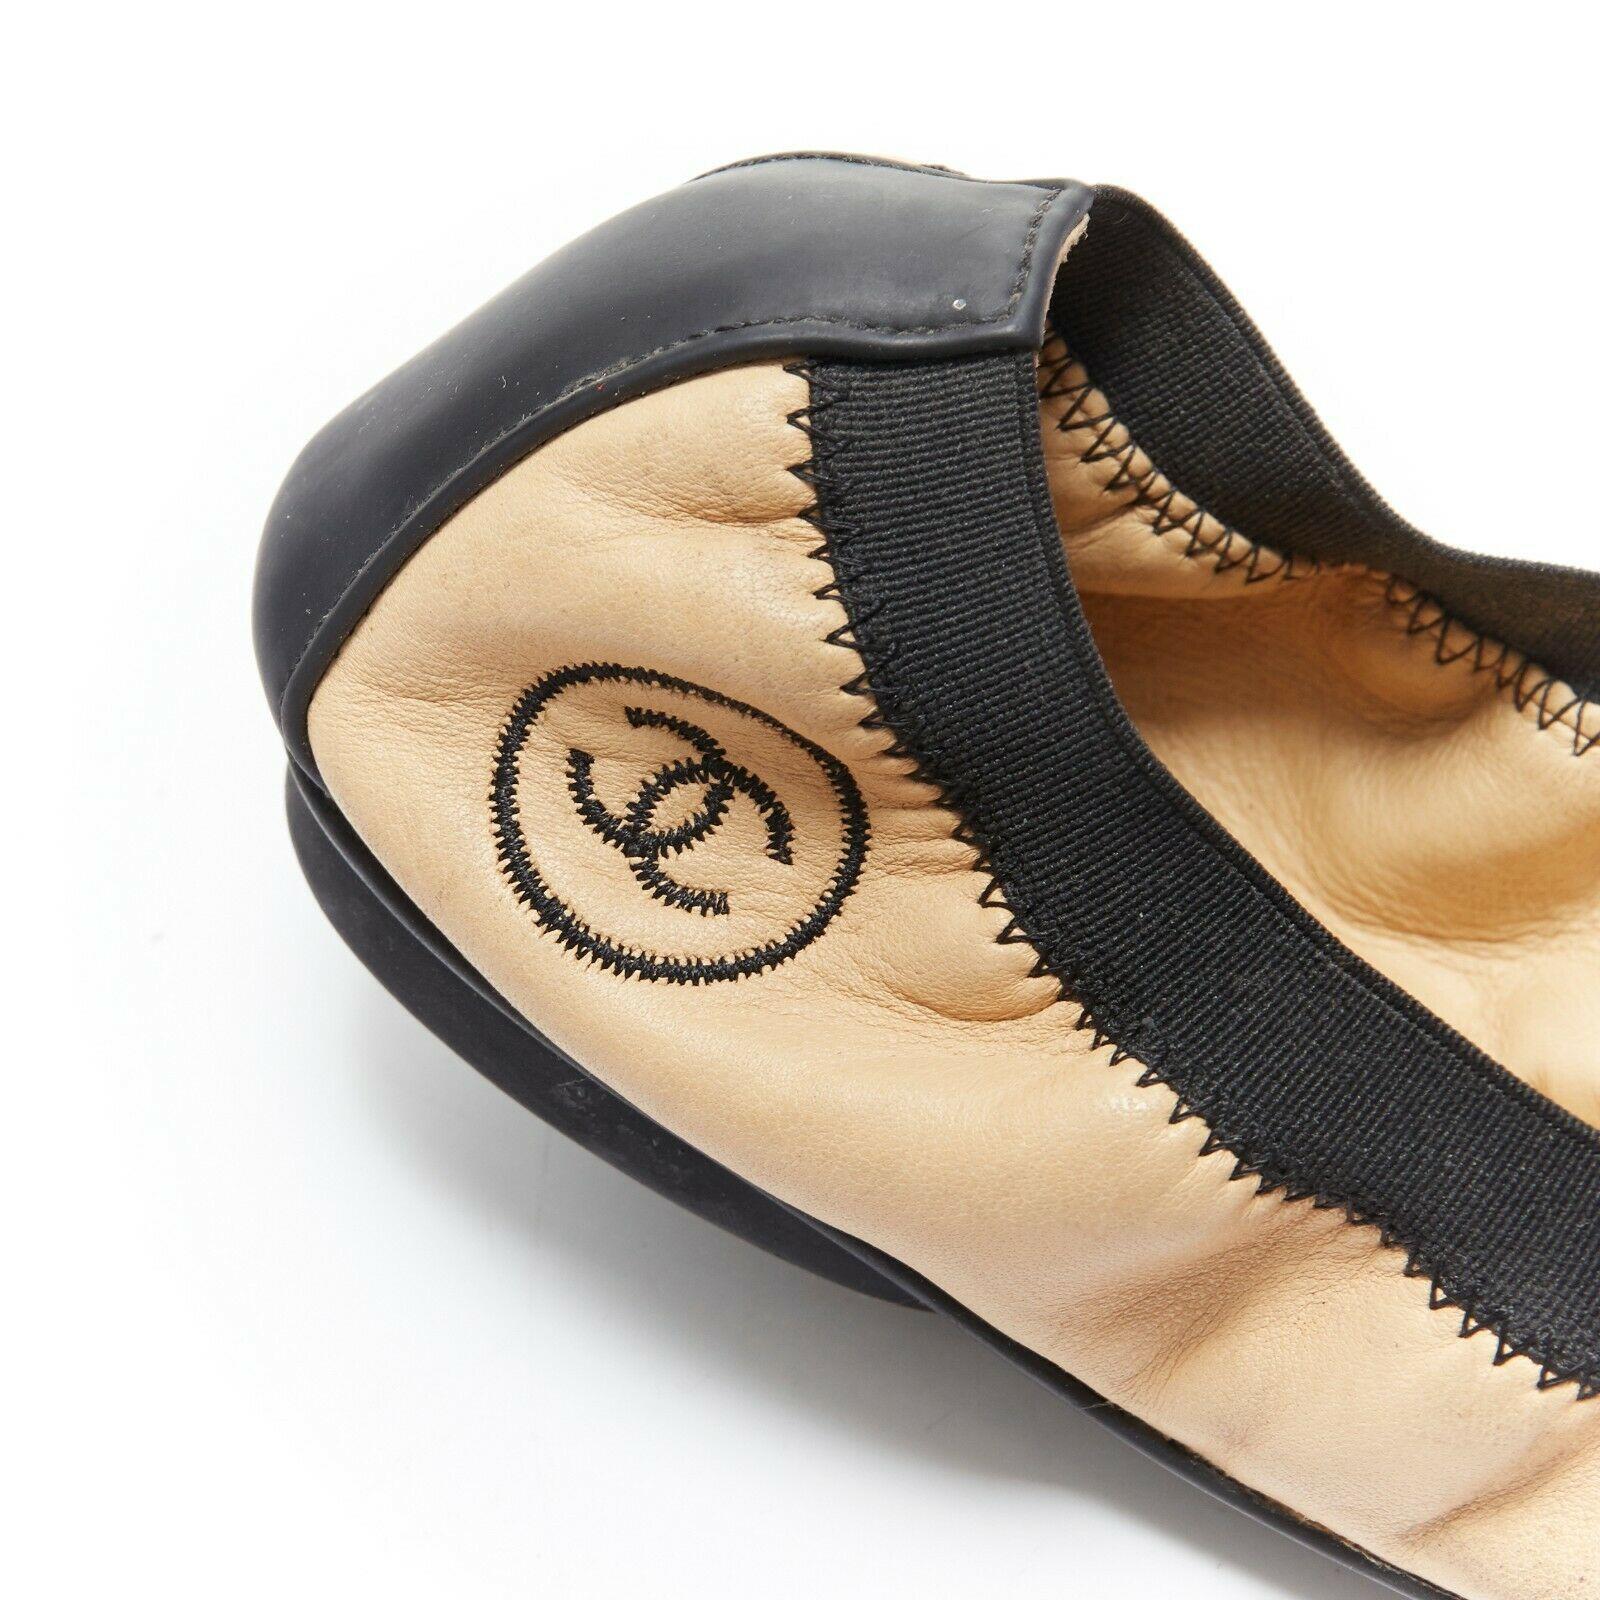 CHANEL KARL LAGERFELD nude beige black elastic band classic ballet flats EU37.5 
Reference: EACN/A00088 
Brand: Chanel 
Designer: Karl Lagerfeld 
Material: leather 
Color: Beige 
Extra Detail: Ballet flats. Round Toe cap. Elastic band trims.